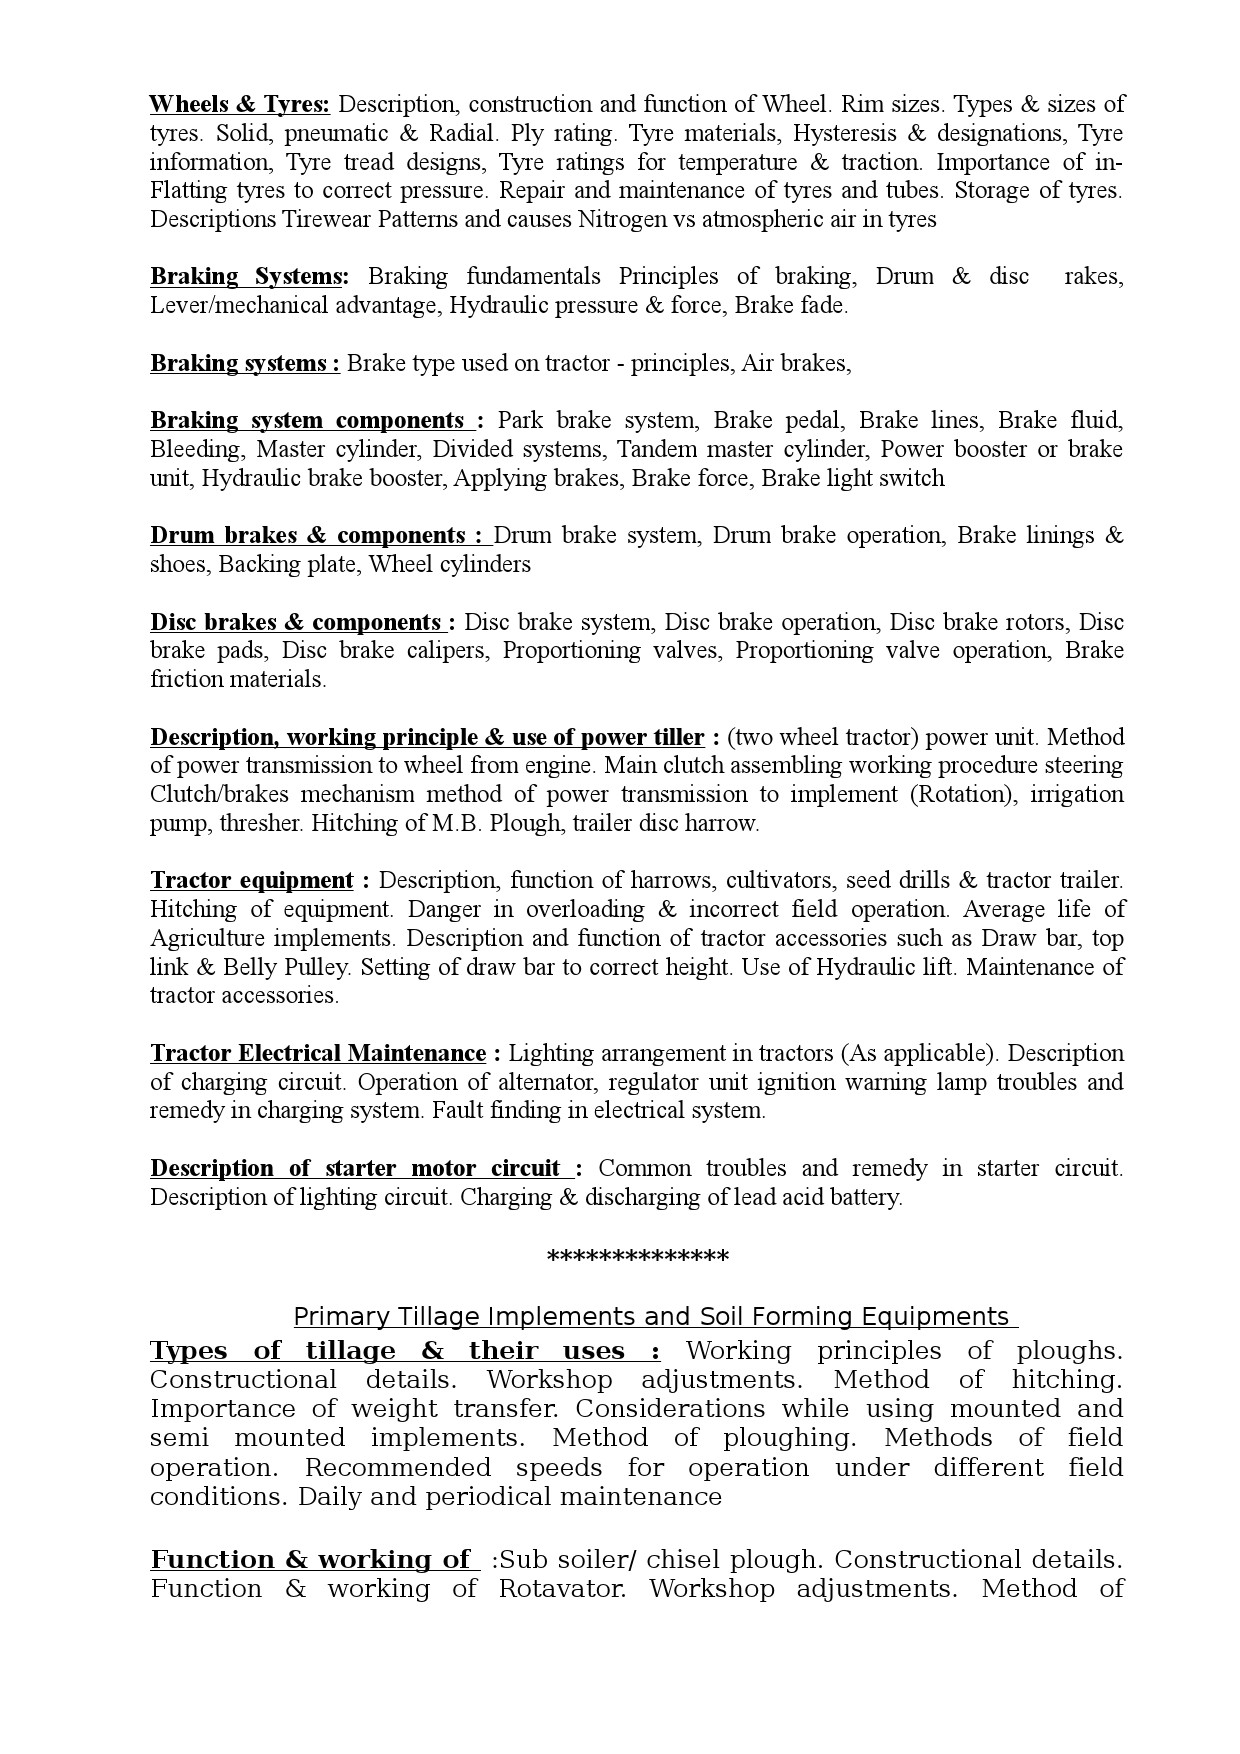 Junior Instructor Mechanical Agricultural Machinery KPSC Exam Syllabus May 2021 - Notification Image 5